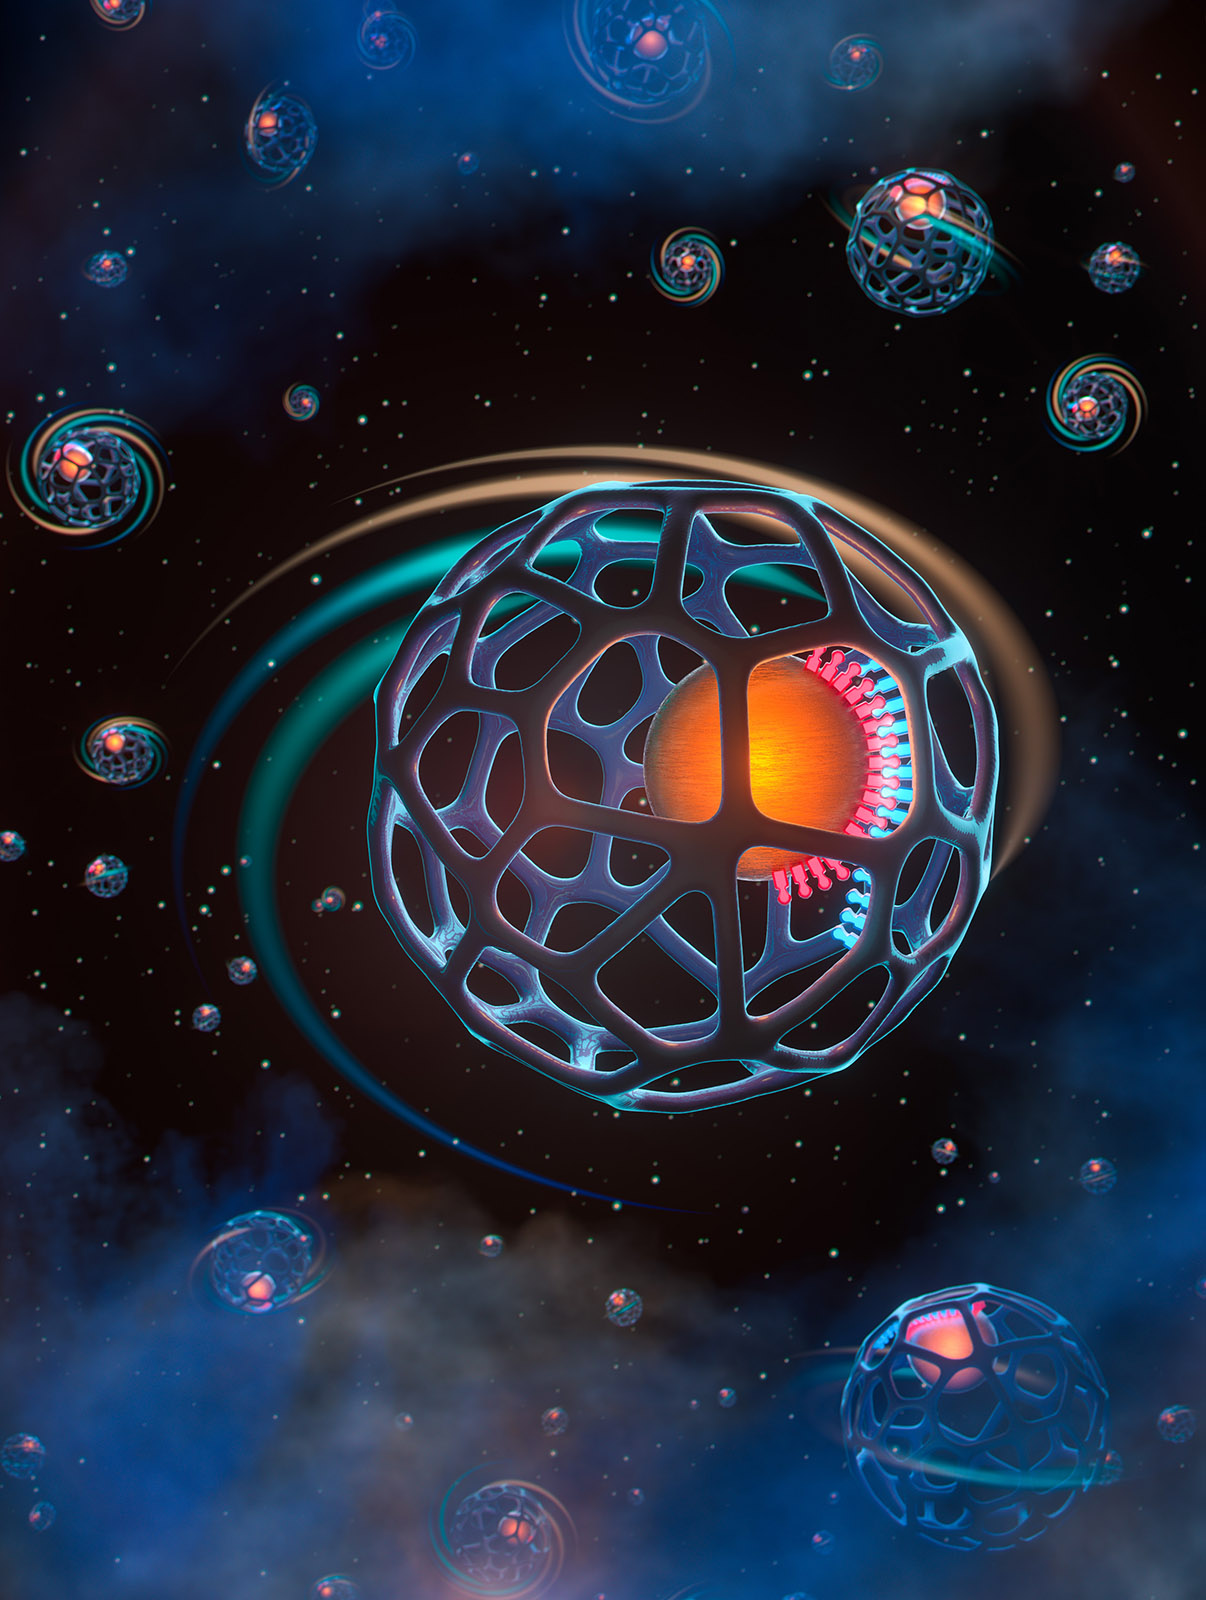 A spherical metallic cage with large pores is in the center of the image. Within the cage, a glowing metal core is bound to the cage via a zipper-like mechanism. Motion trails indicate that the cage is rotating. The background consists of a galaxy of nanomotors receding into the distance to form a starfield.